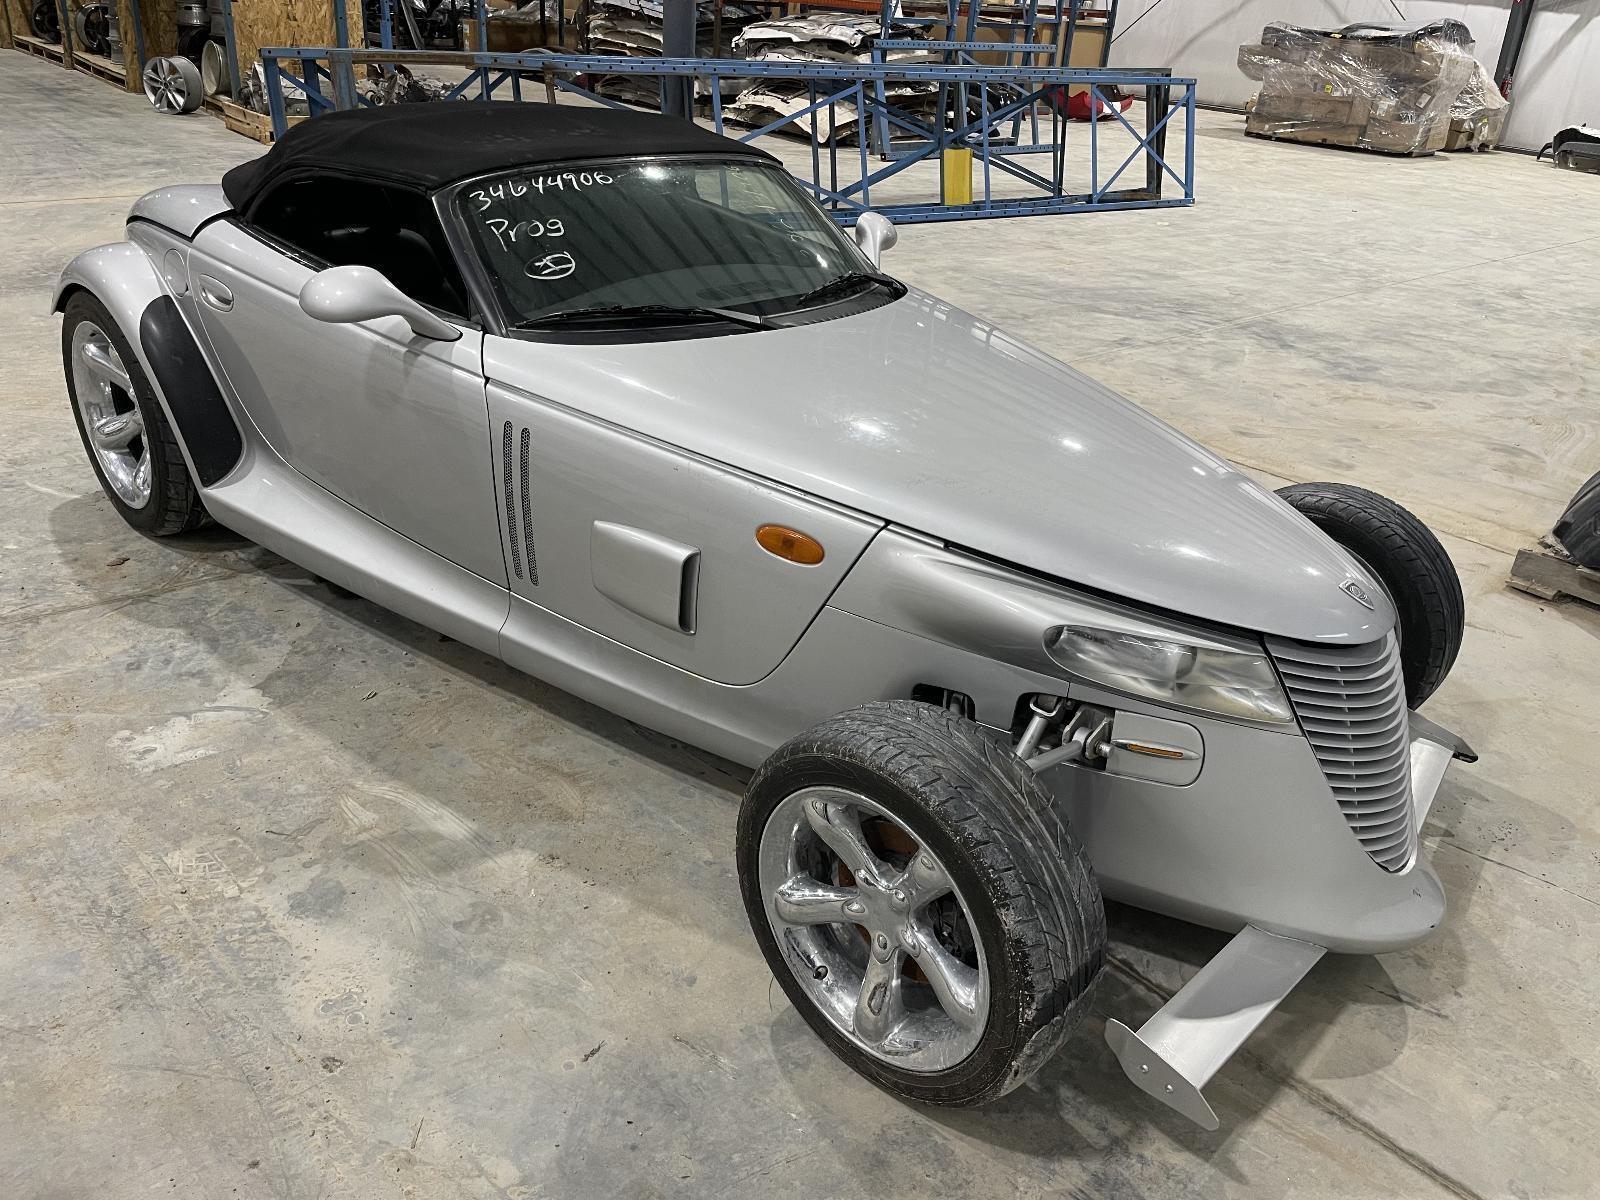 2001 PLYMOUTH PROWLER CONVERTIBLE ROOF ONLY BLACK  99 00 01 02 FLOOD VEHICLE